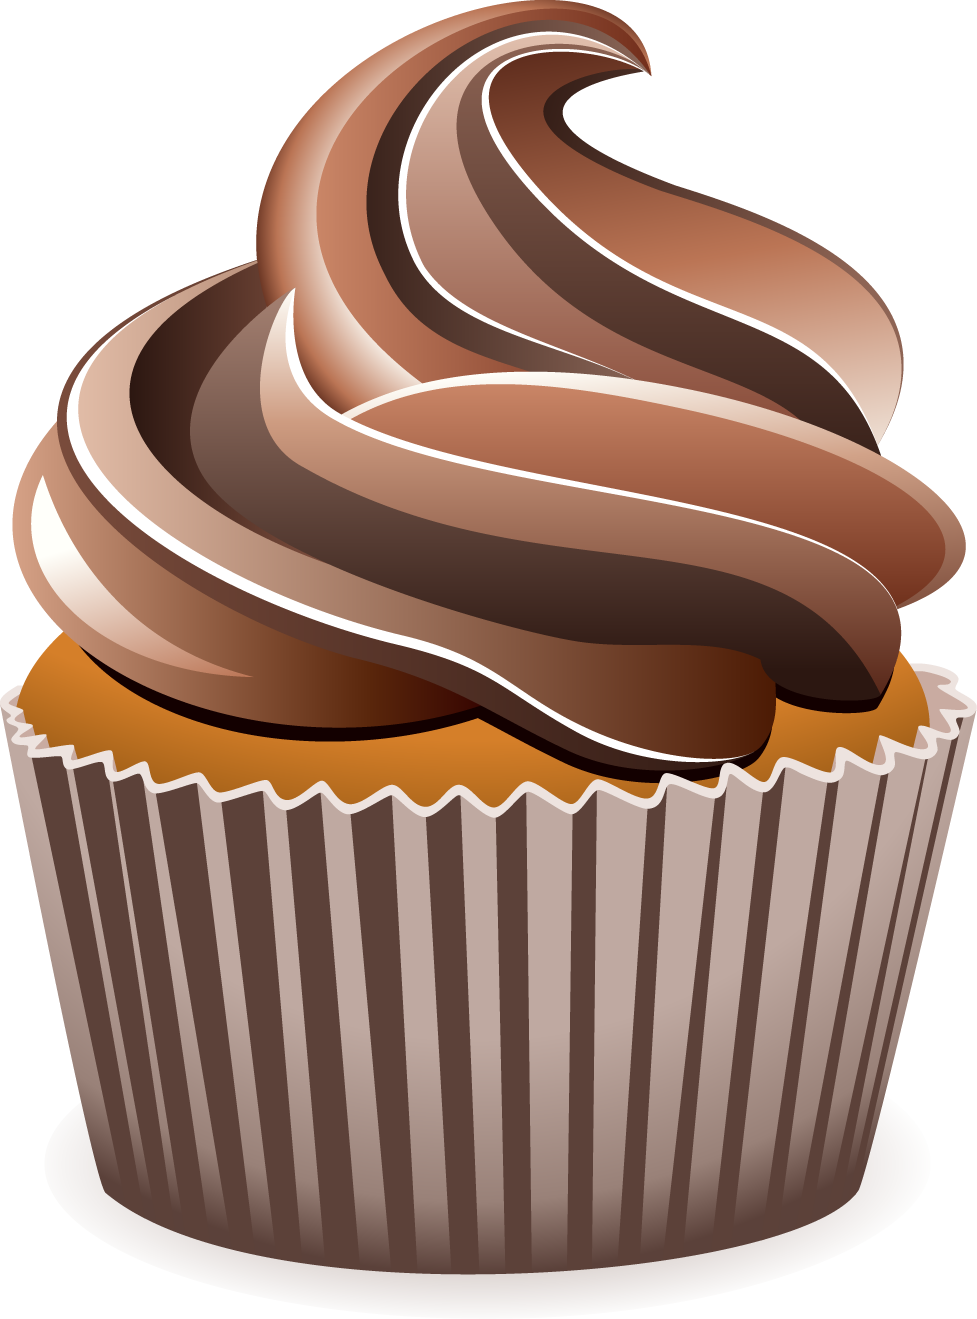 cupcake clipart free download - photo #36